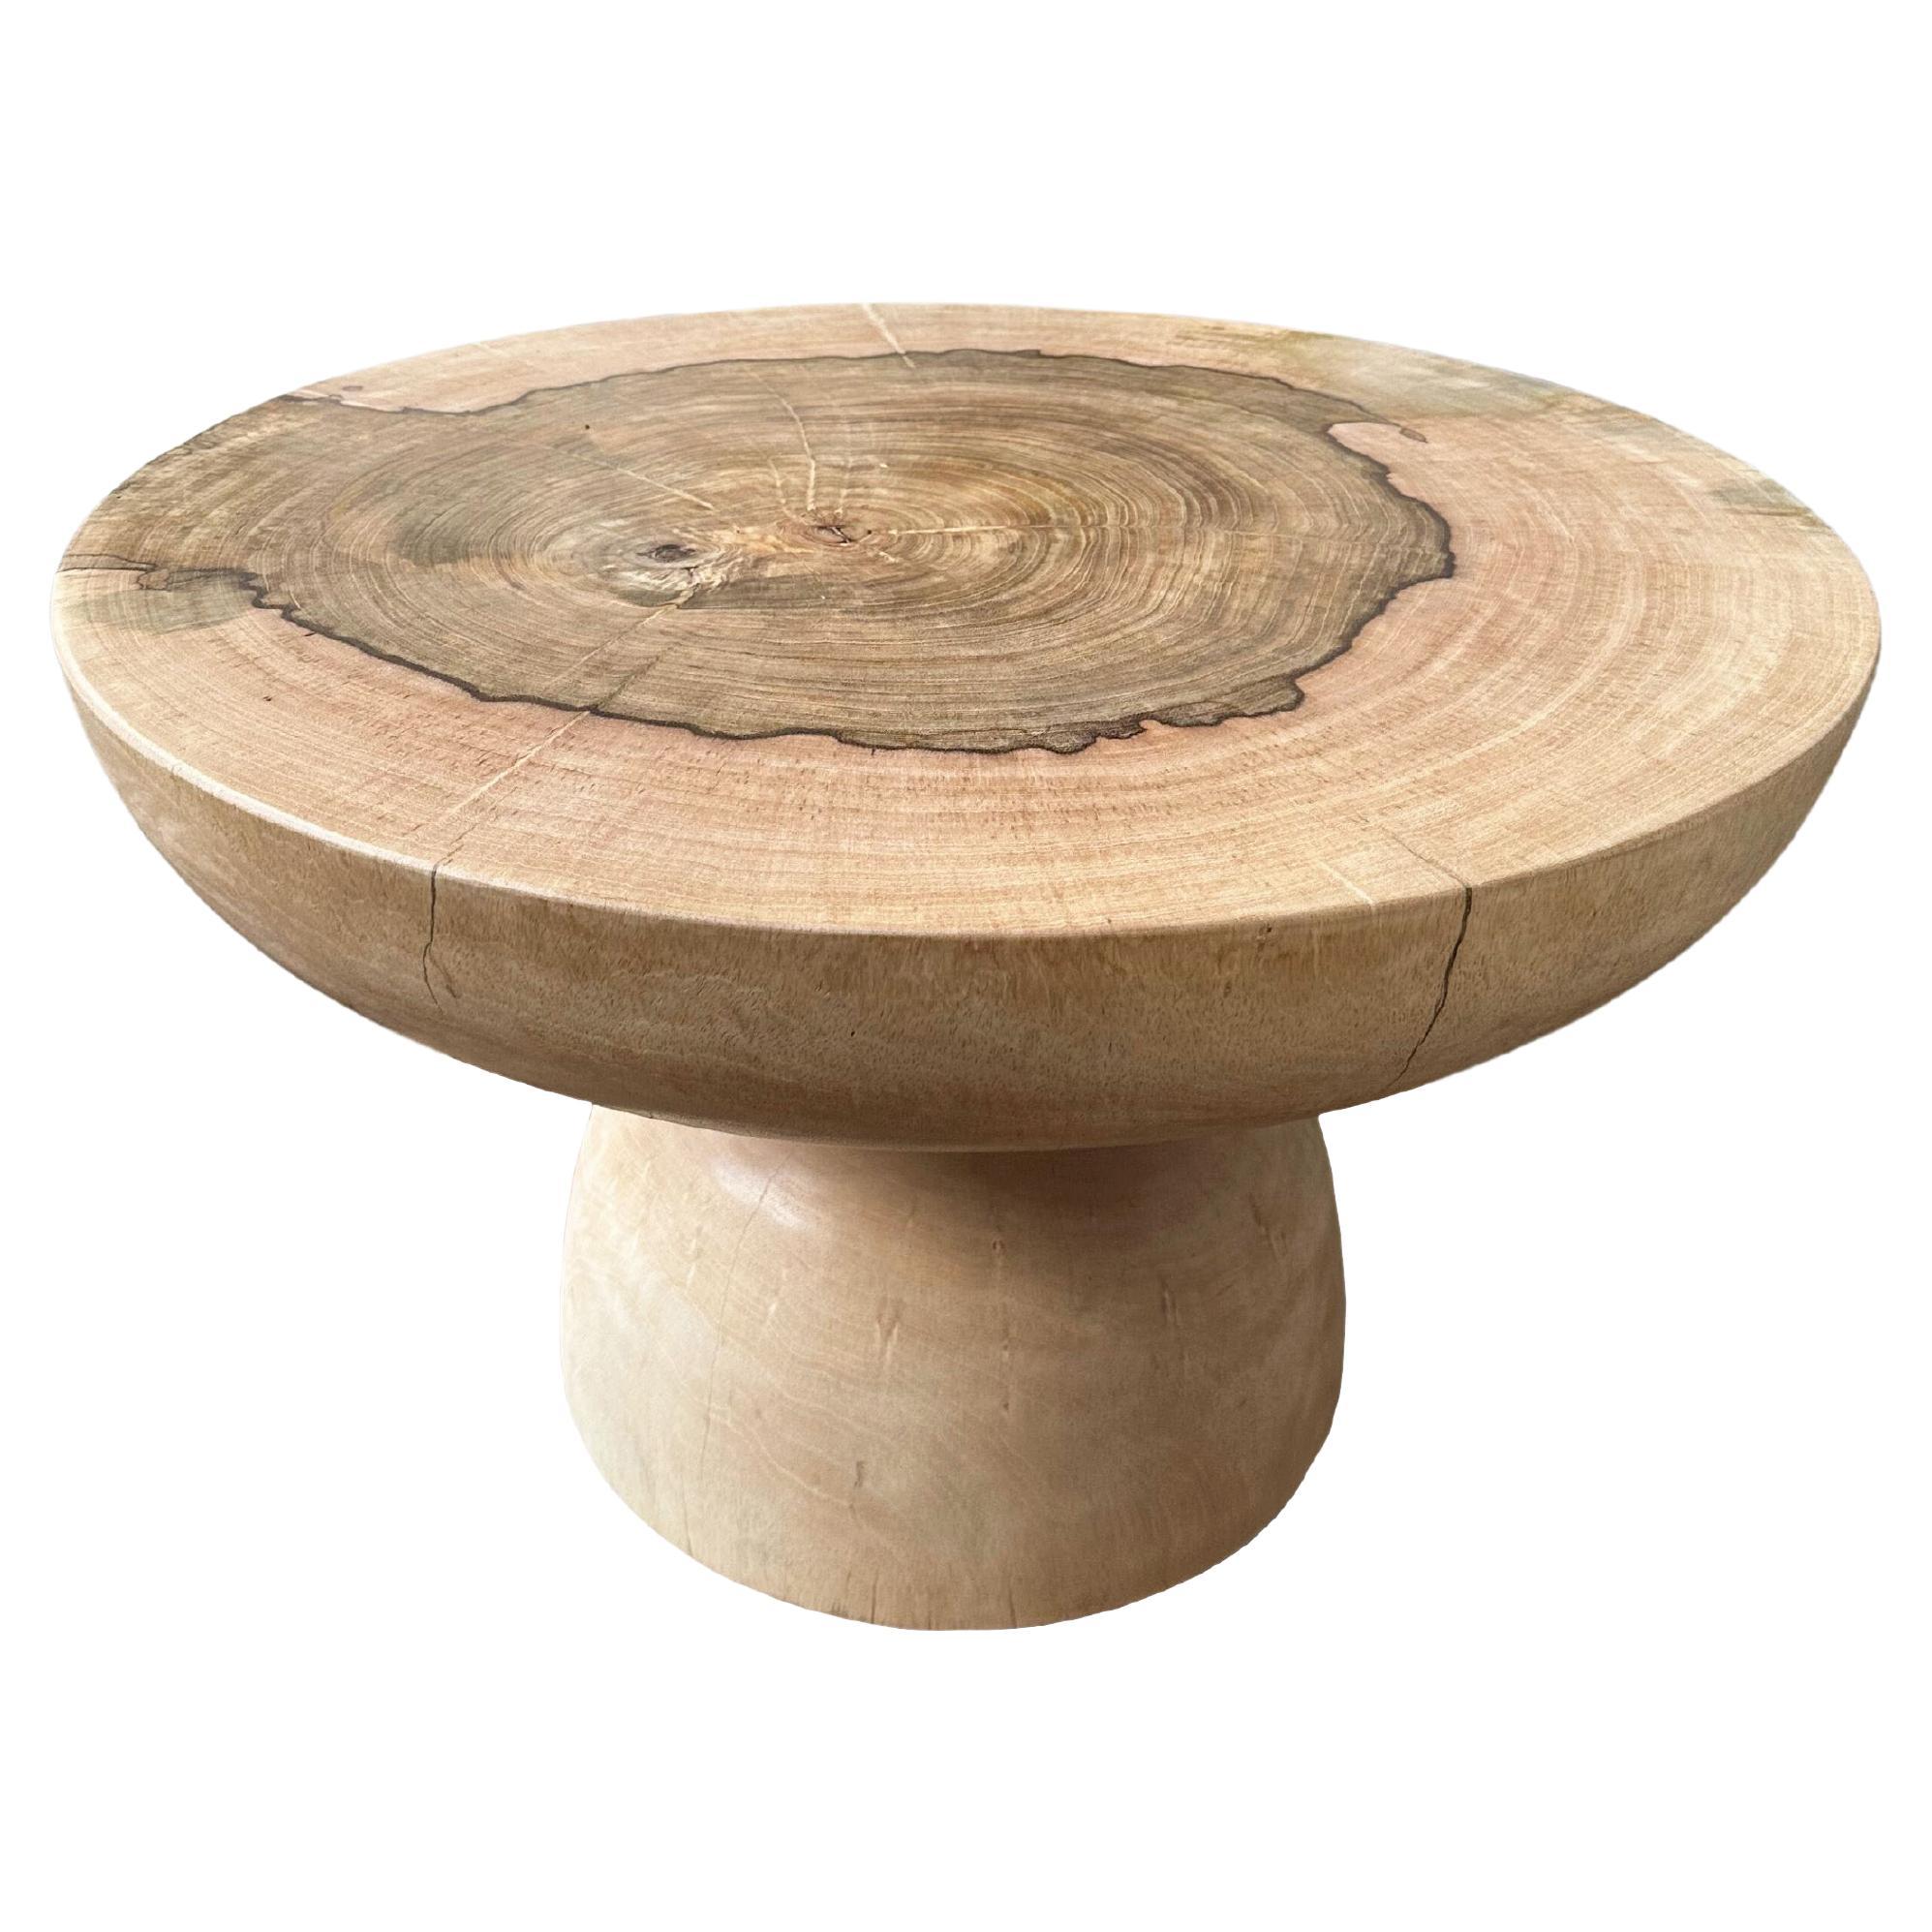 Sculptural Round Table Mango Wood, Natural Finish, Modern Organic For Sale